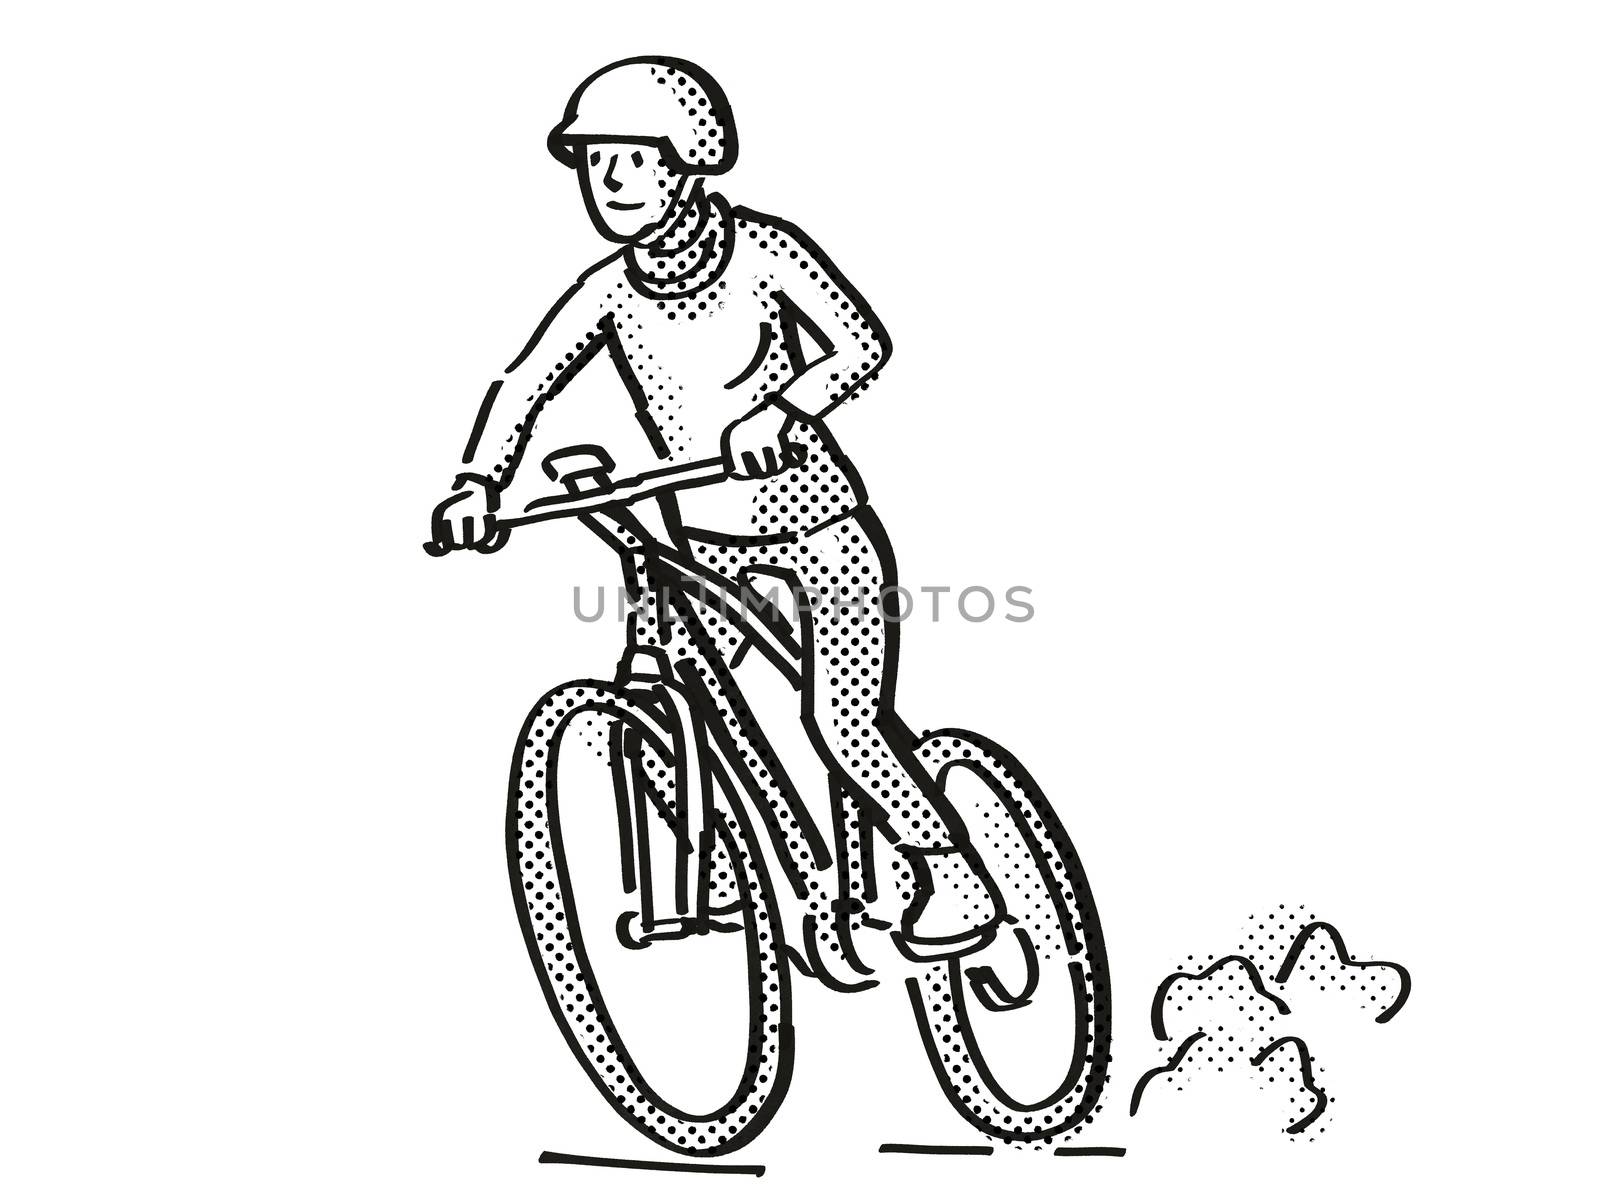 Retro cartoon style drawing of a female cyclist riding on an electric bicycle or  e-bike on isolated white background done in black and white